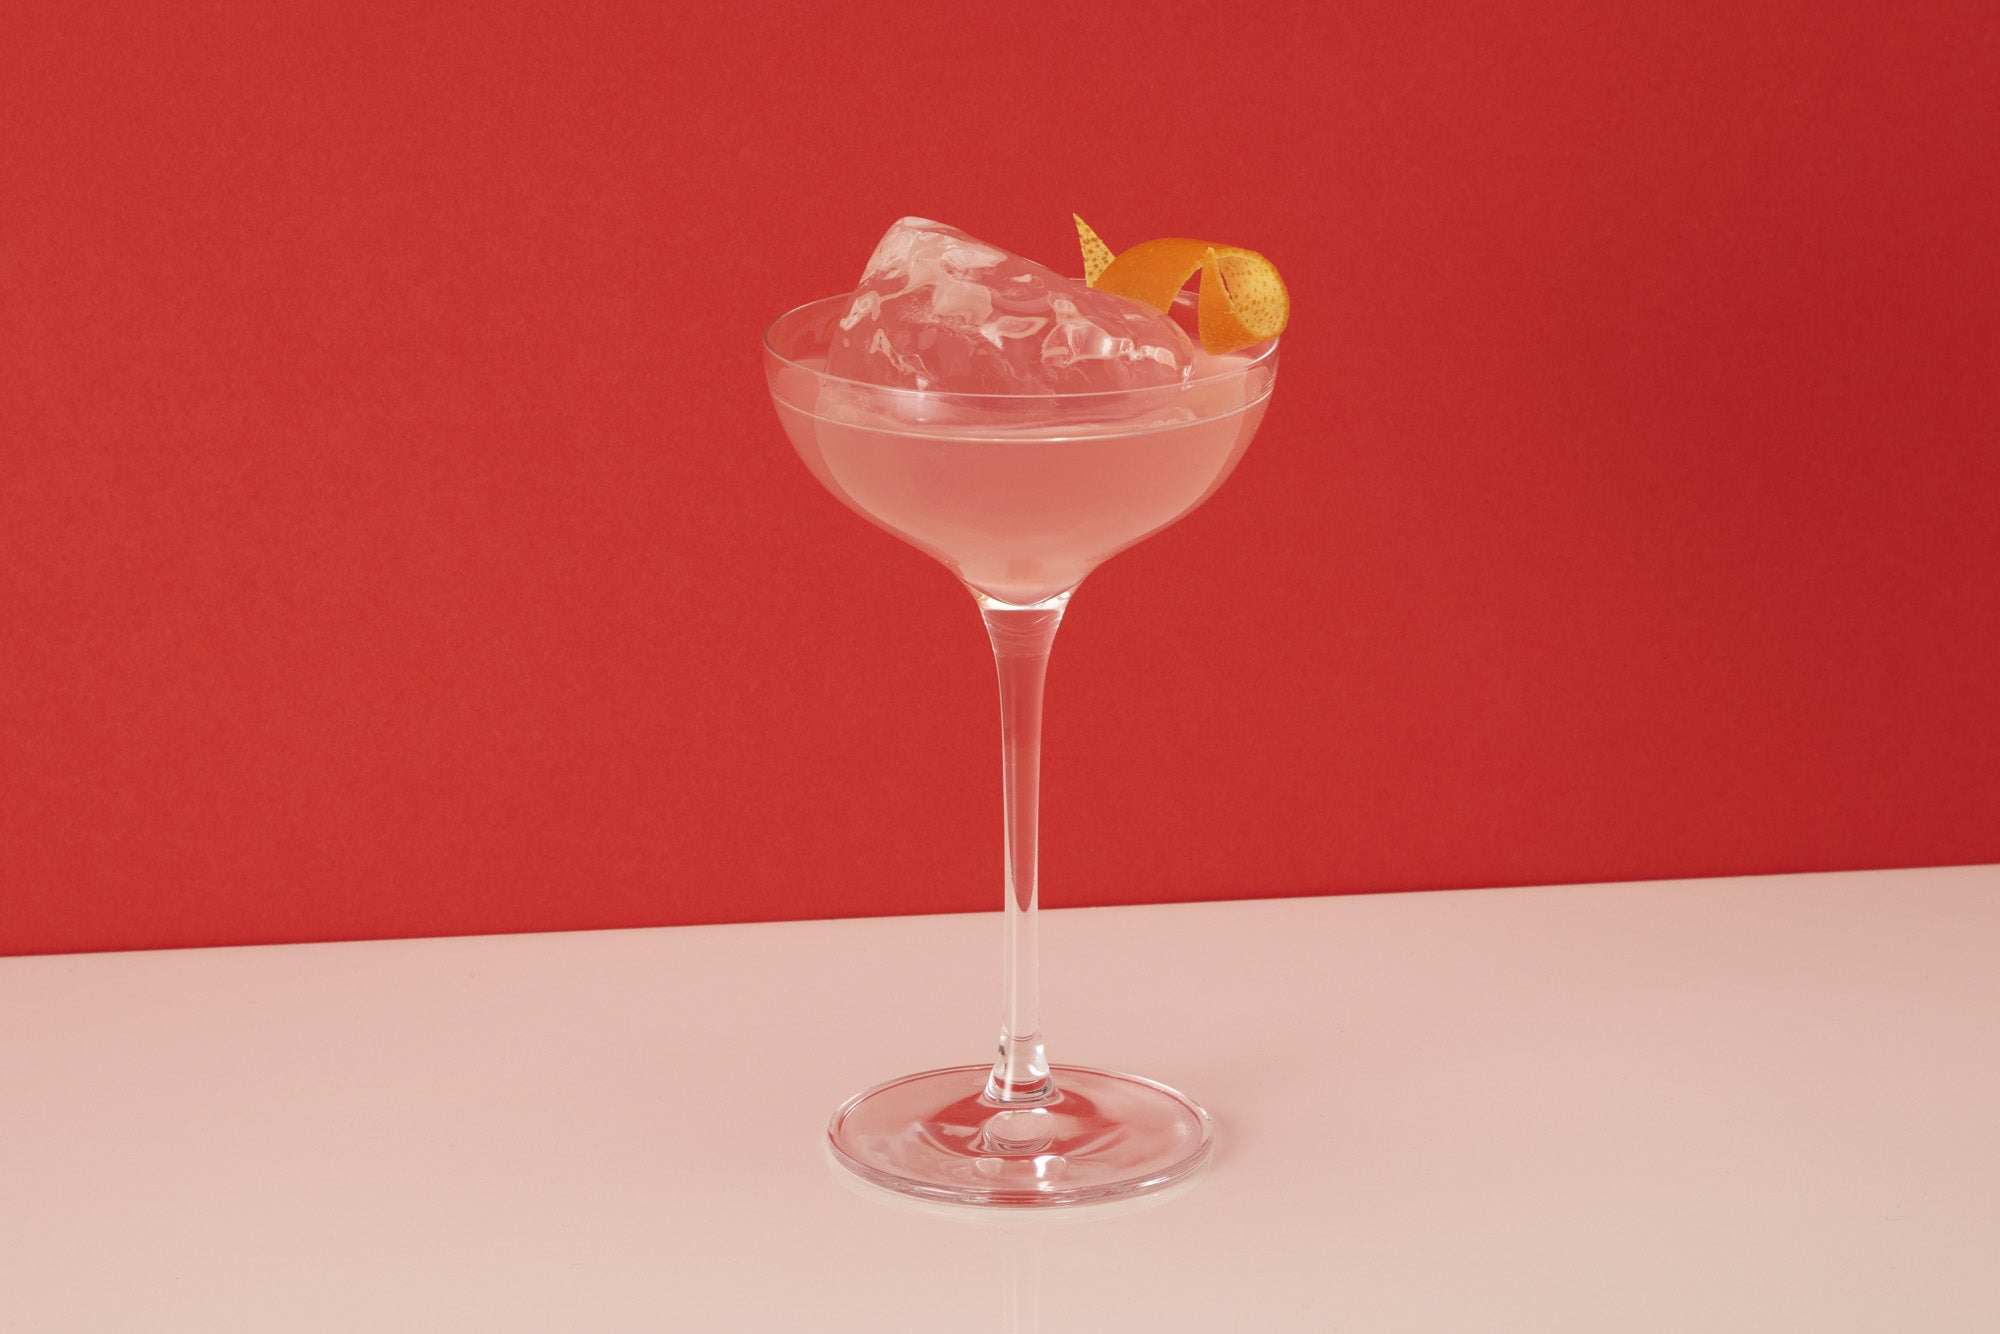 Image of an Cosmopolitan vodka original recipe premixed ready to drink cocktail from Craft Cocktails in a martini glass with ice and an orange peel garnish shot on a red and white background